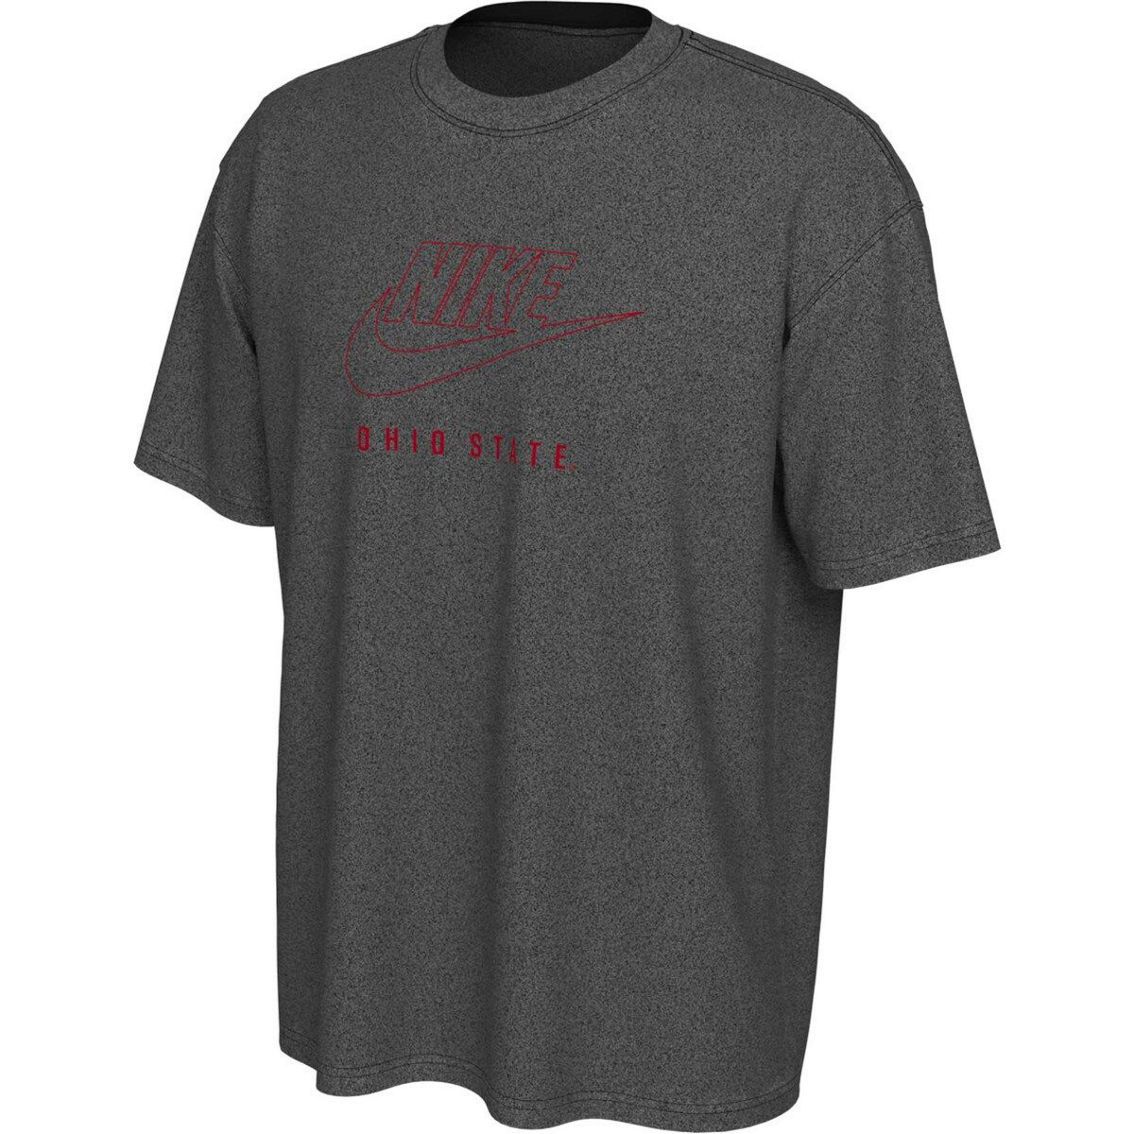 Nike Men's Charcoal Ohio State Buckeyes Washed Max90 T-Shirt - Image 3 of 4